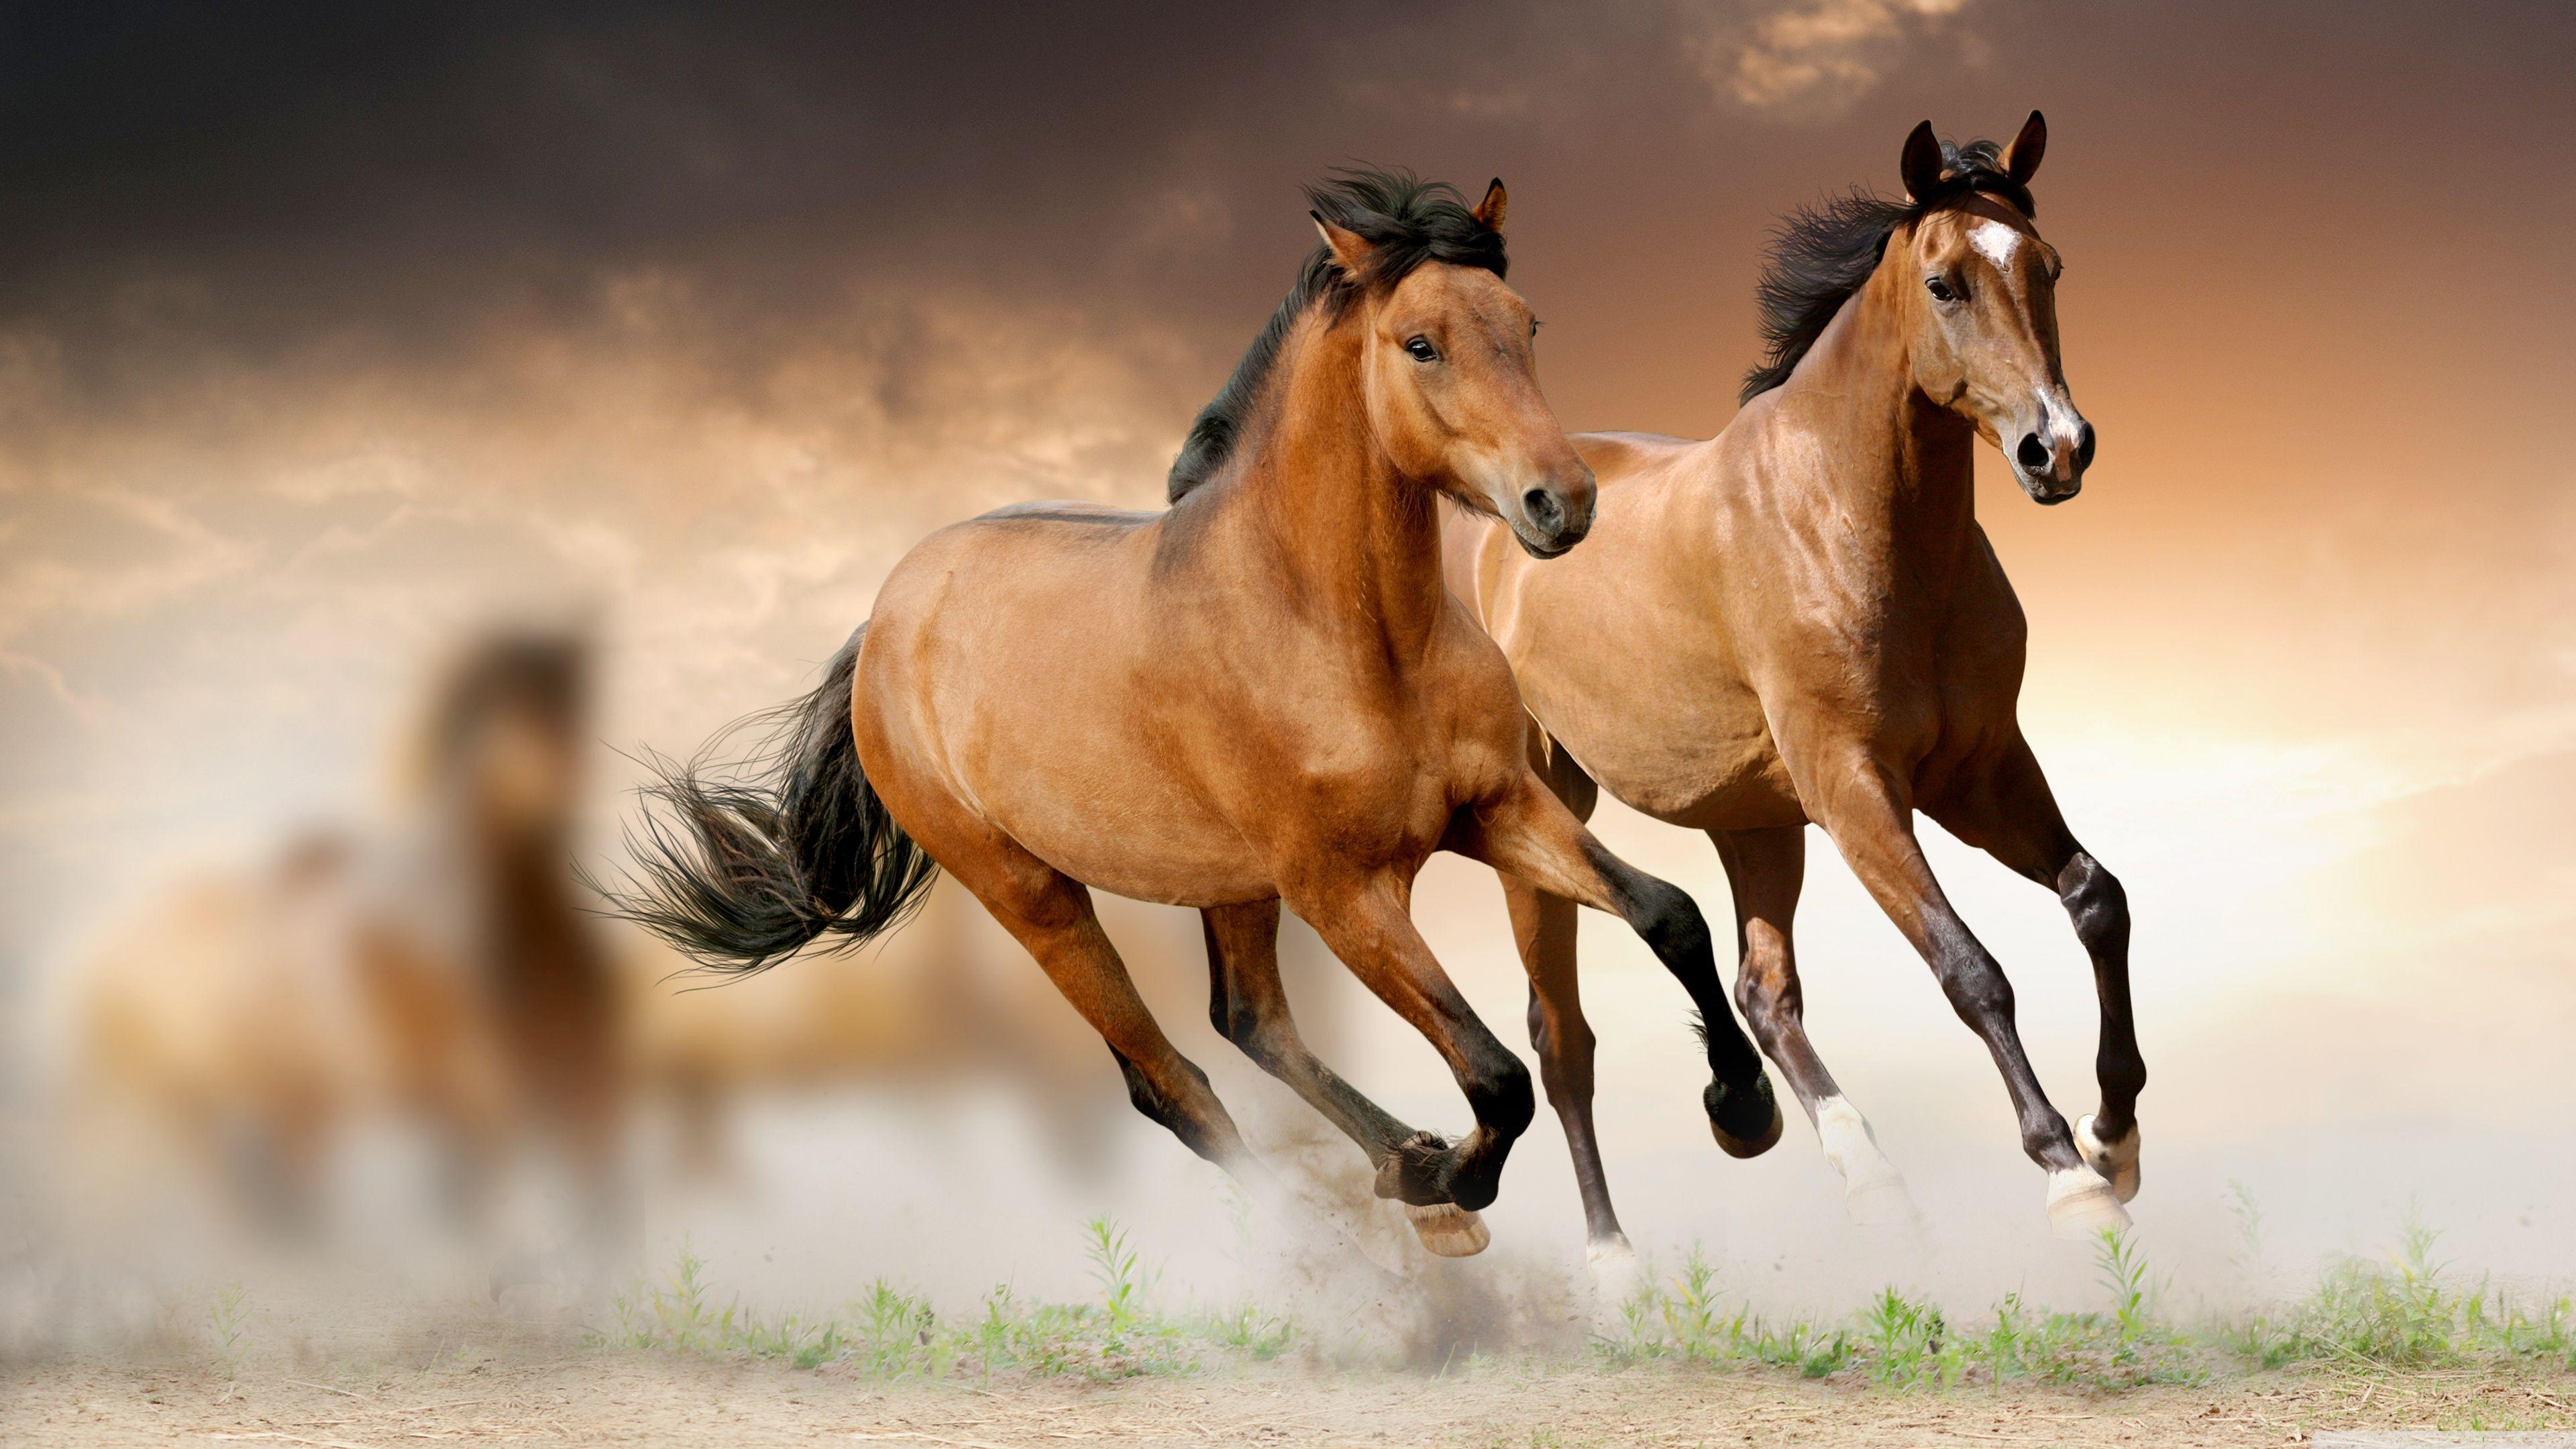 Download Horse Wallpaper HD Picture One HD Wallpaper Picture